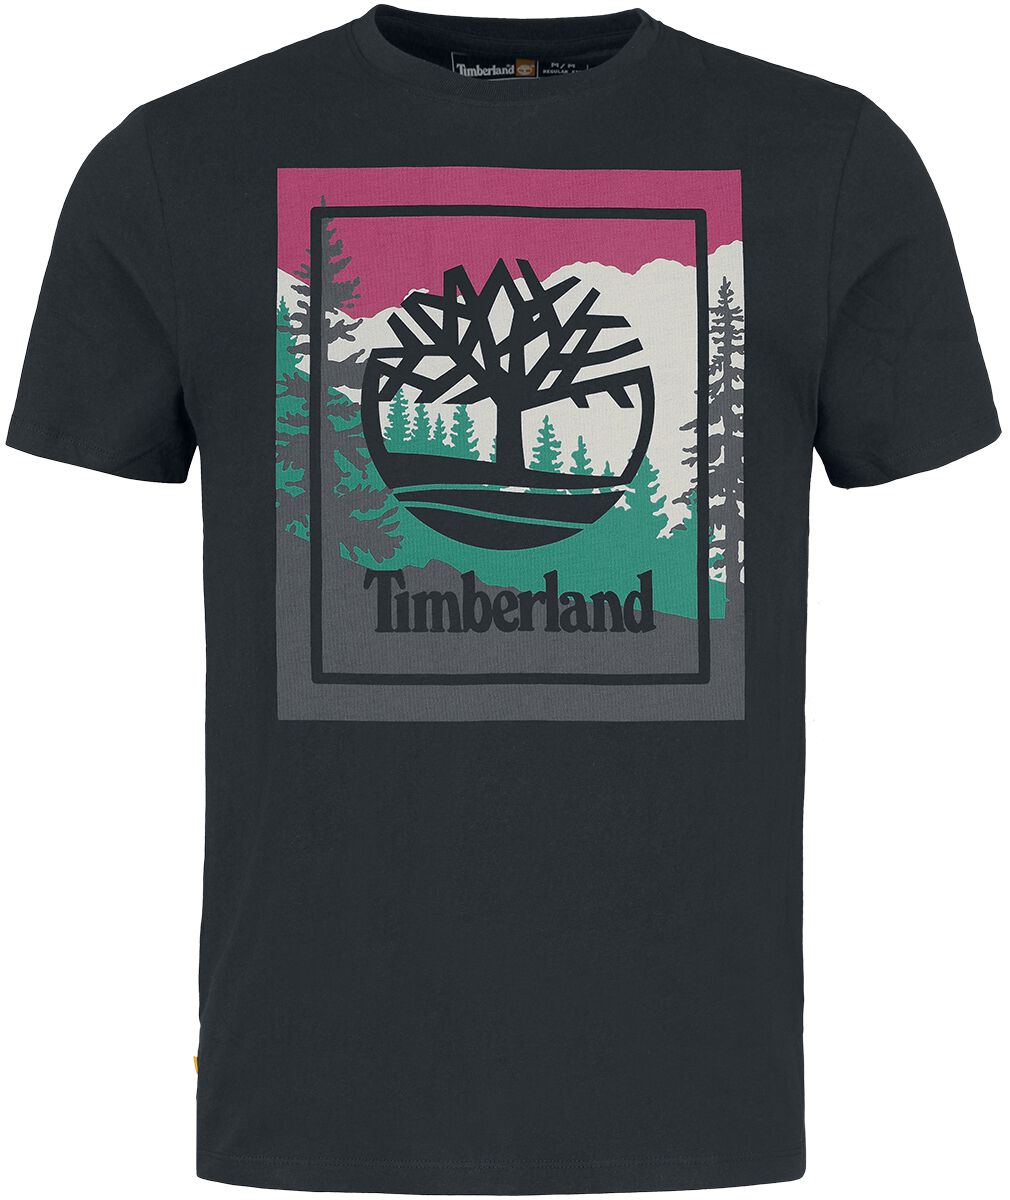 Image of T-Shirt di Timberland - Outdoor inspired graphic t-shirt - S a M - Uomo - nero